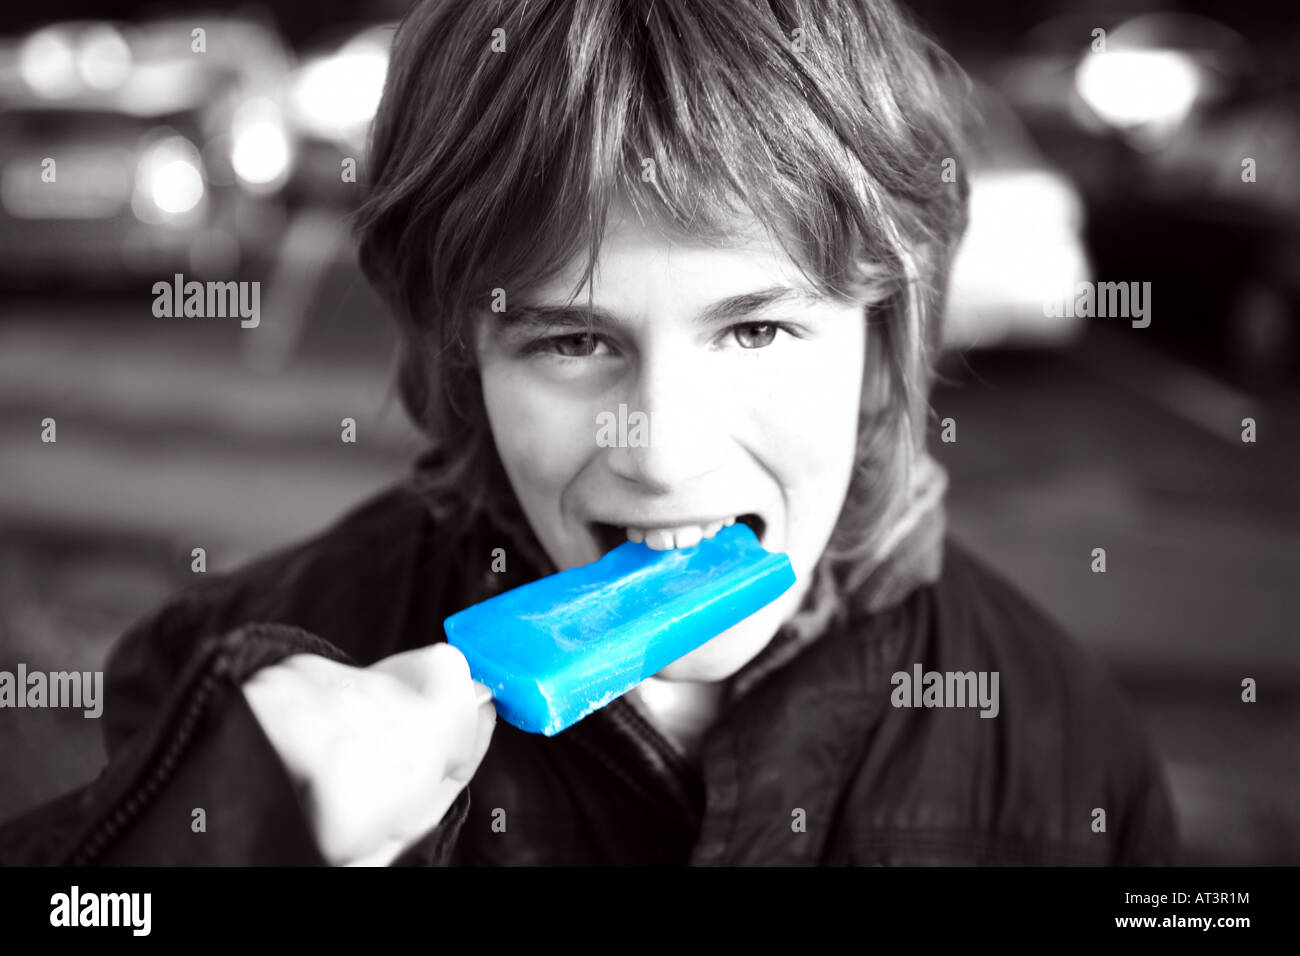 Blue food: a boy eats an iced lolly to illustrate food colourings and additives Stock Photo